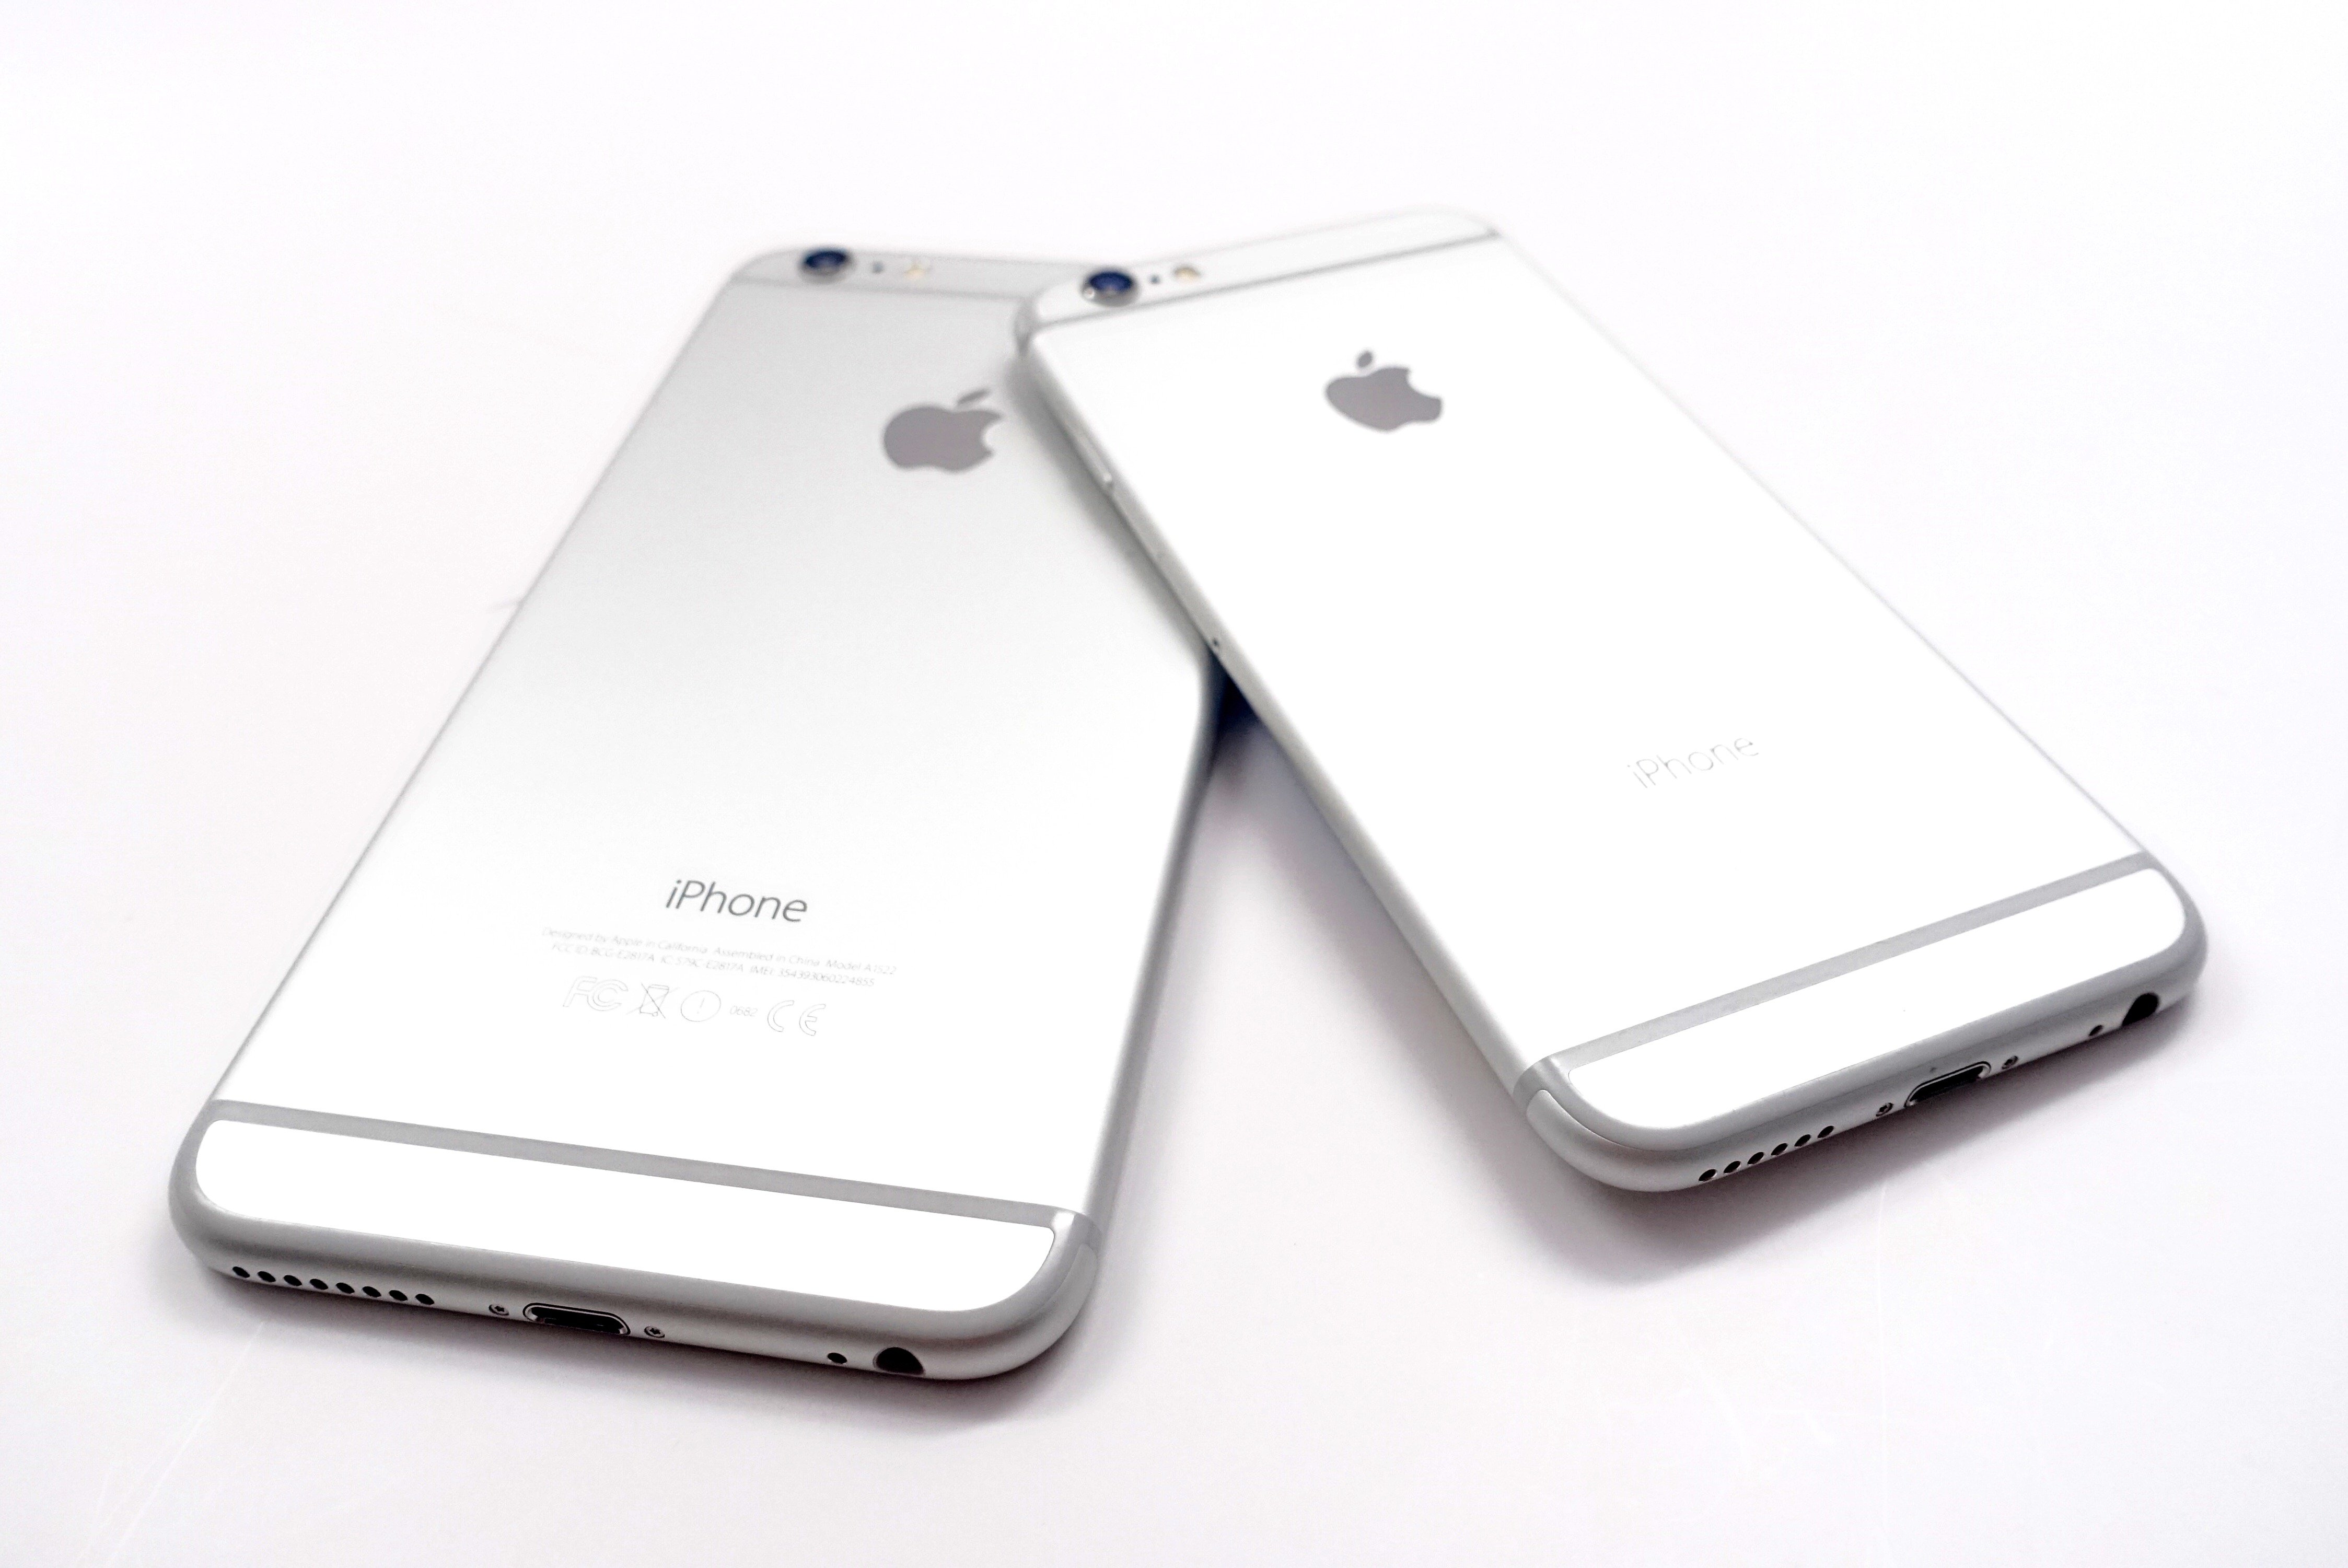 Carriers and retailers are prepped for the iPhone 6s release date.